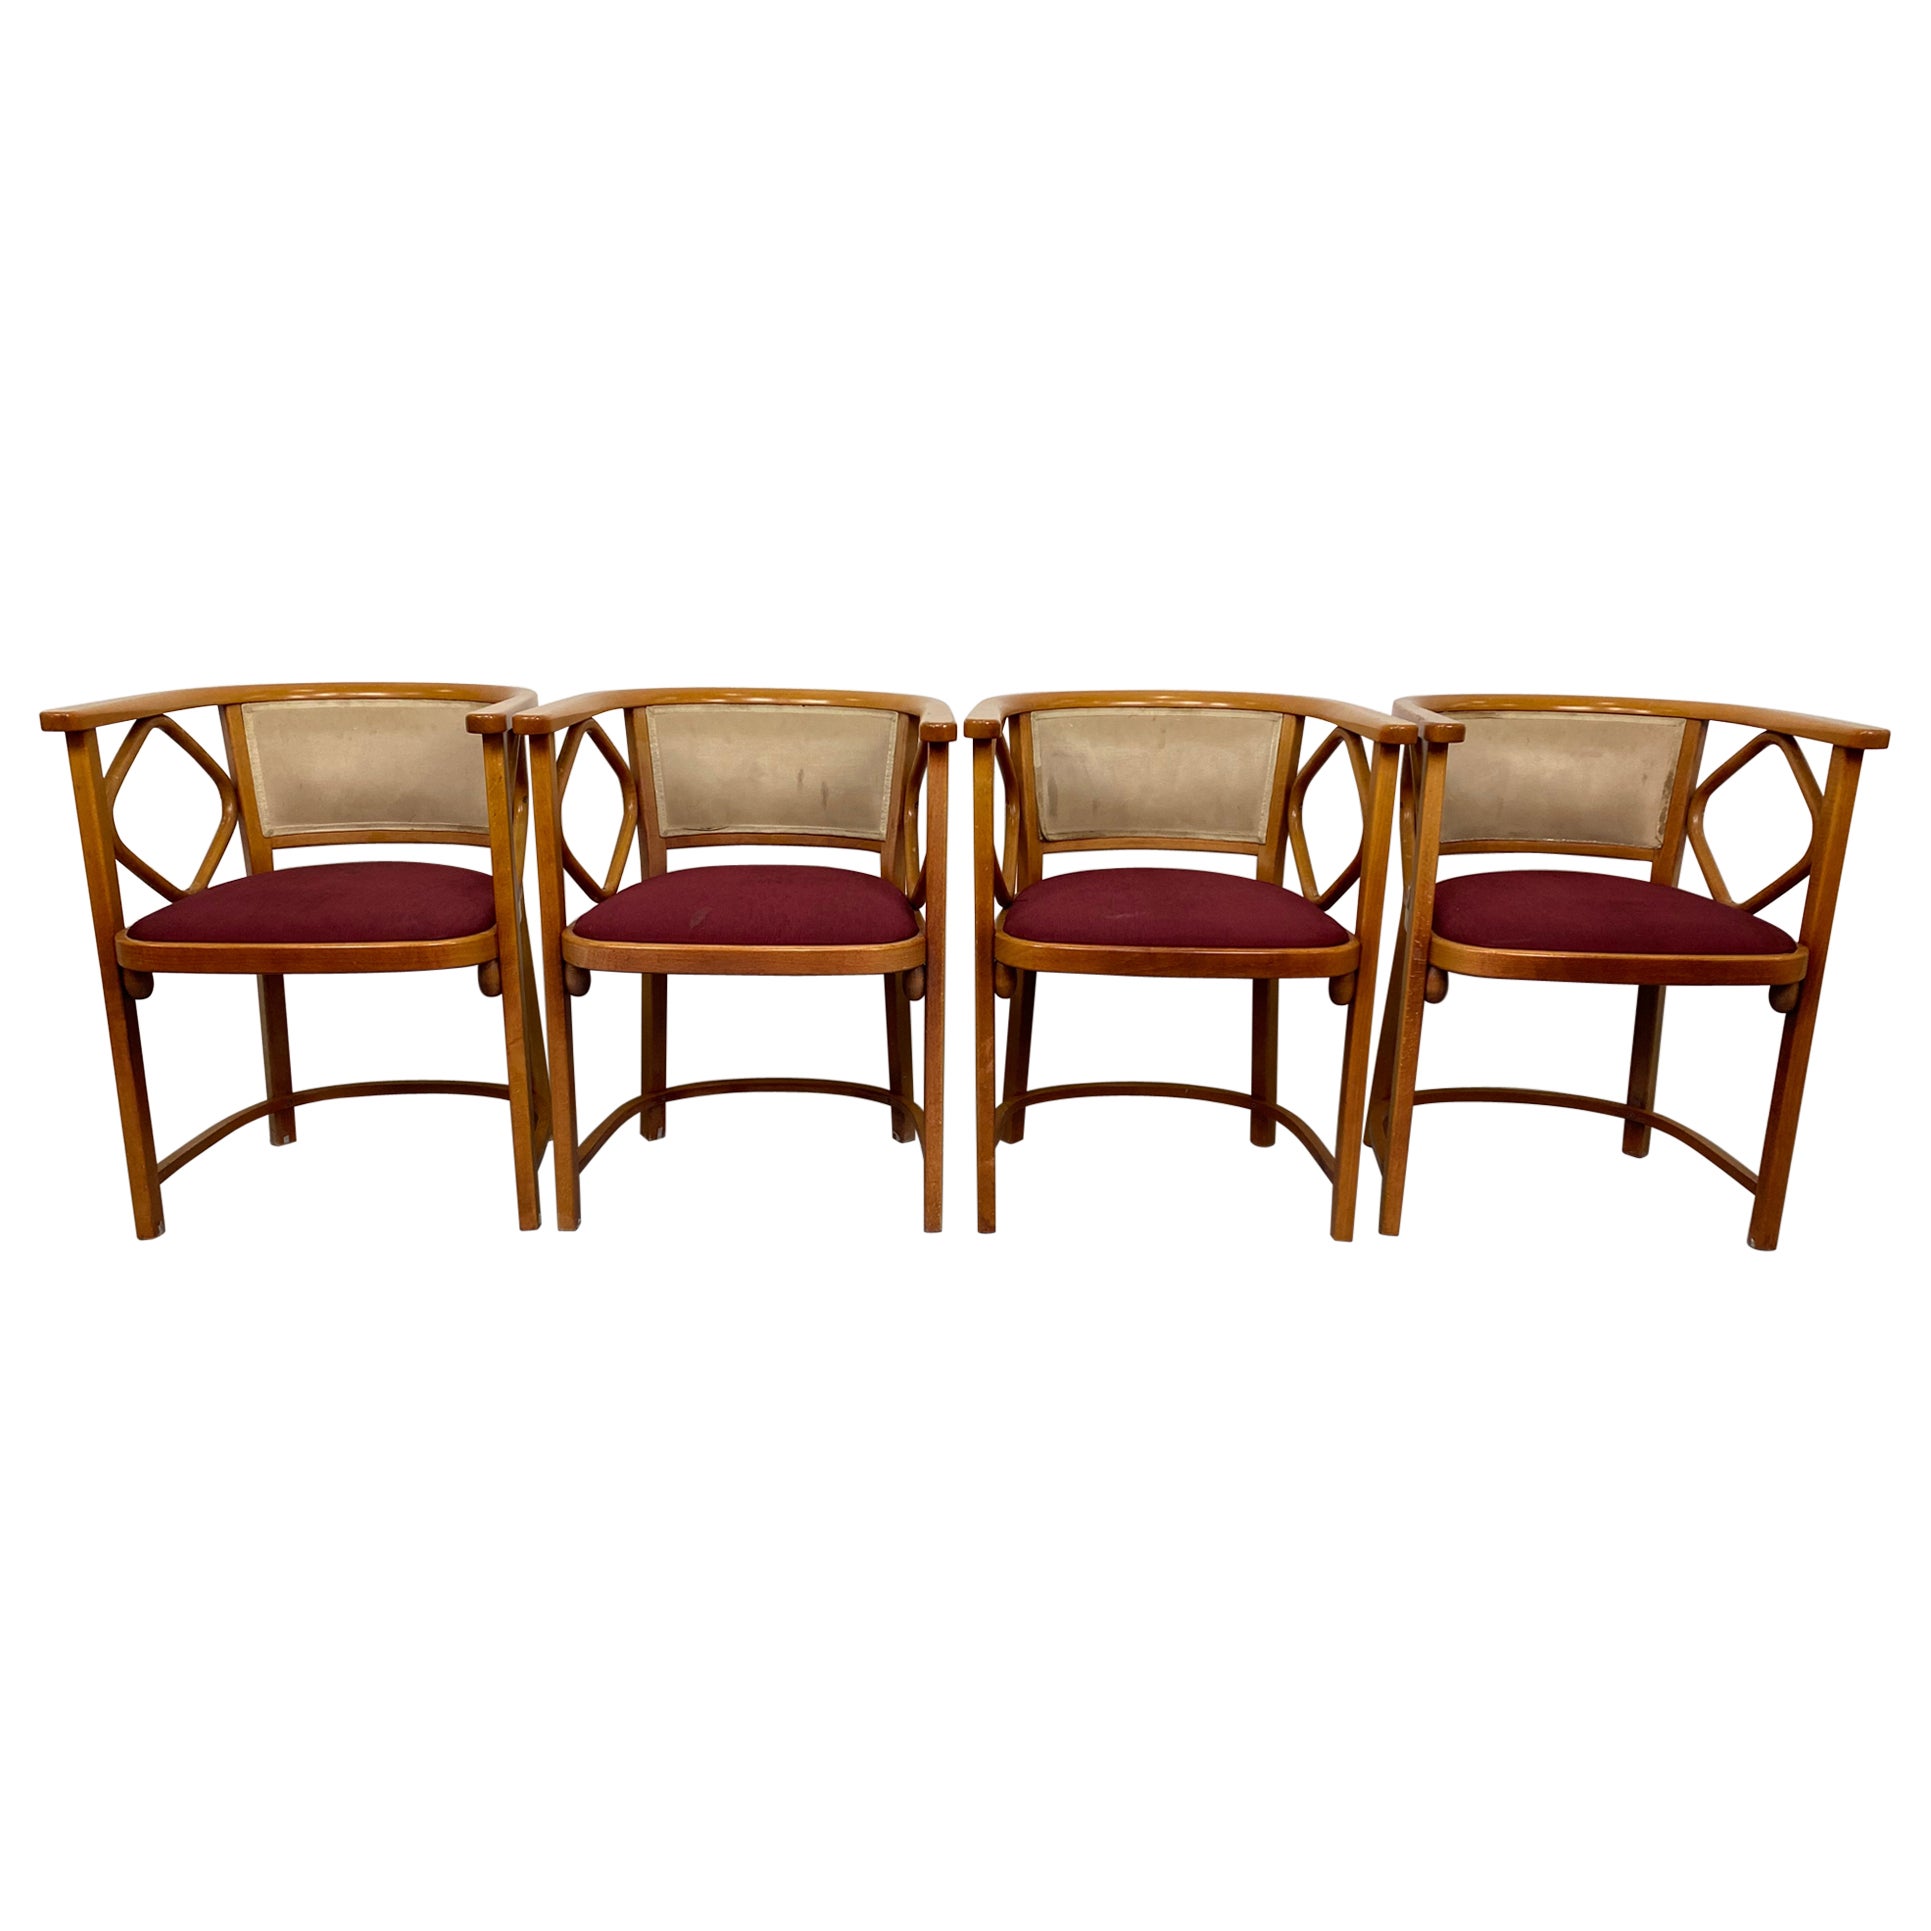 Set of 4 Fledermaus Chairs Executed by Thonet